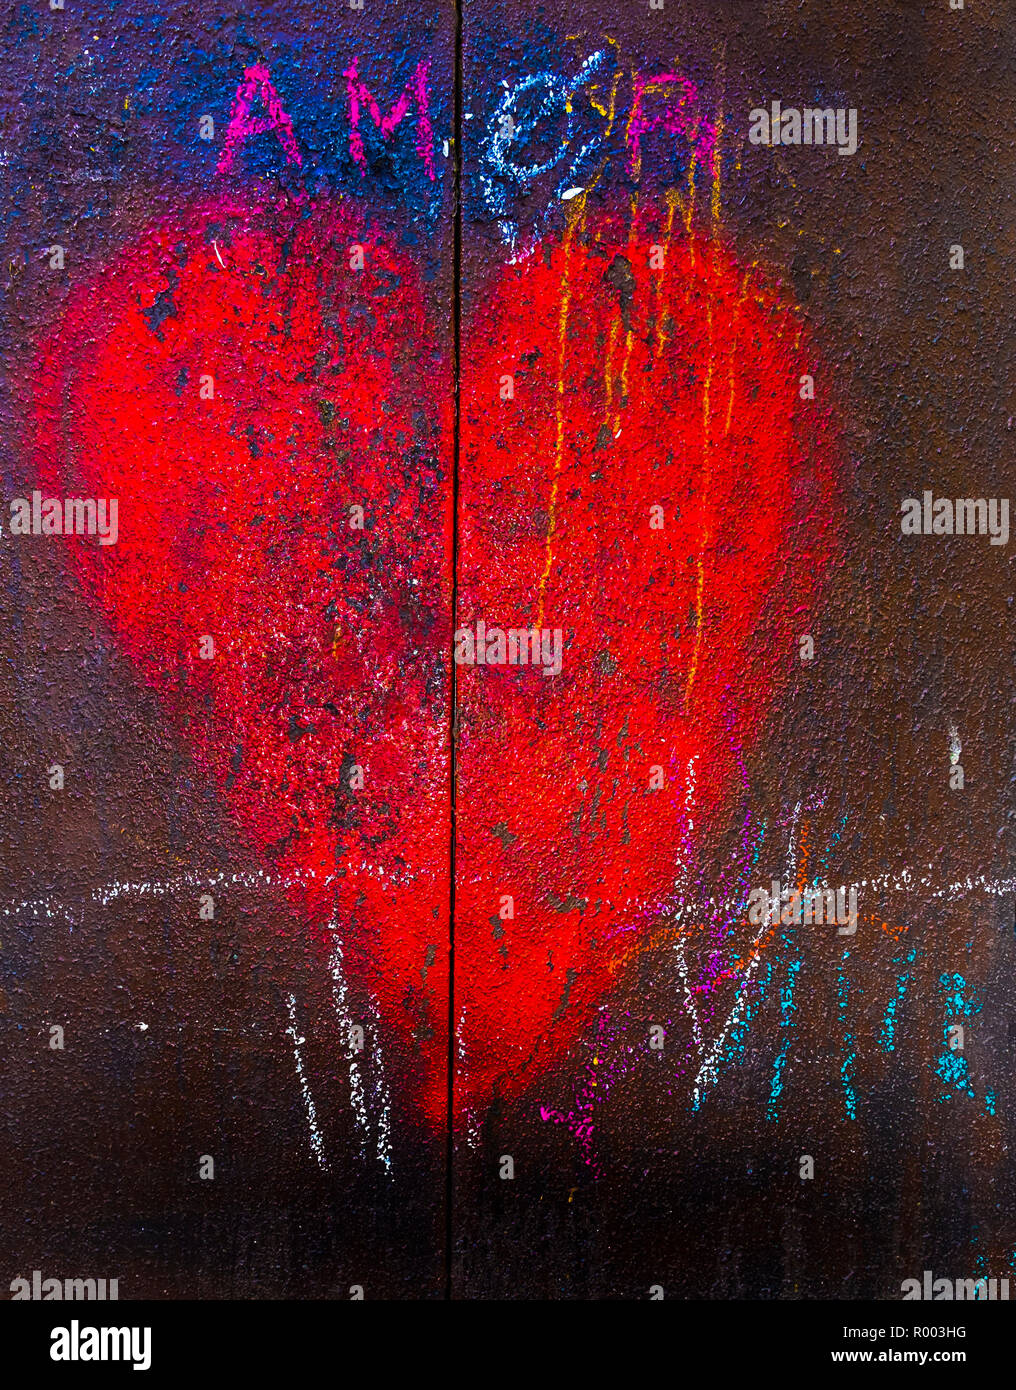 red heart on a rusty metal door and the wor: 'amor' Stock Photo